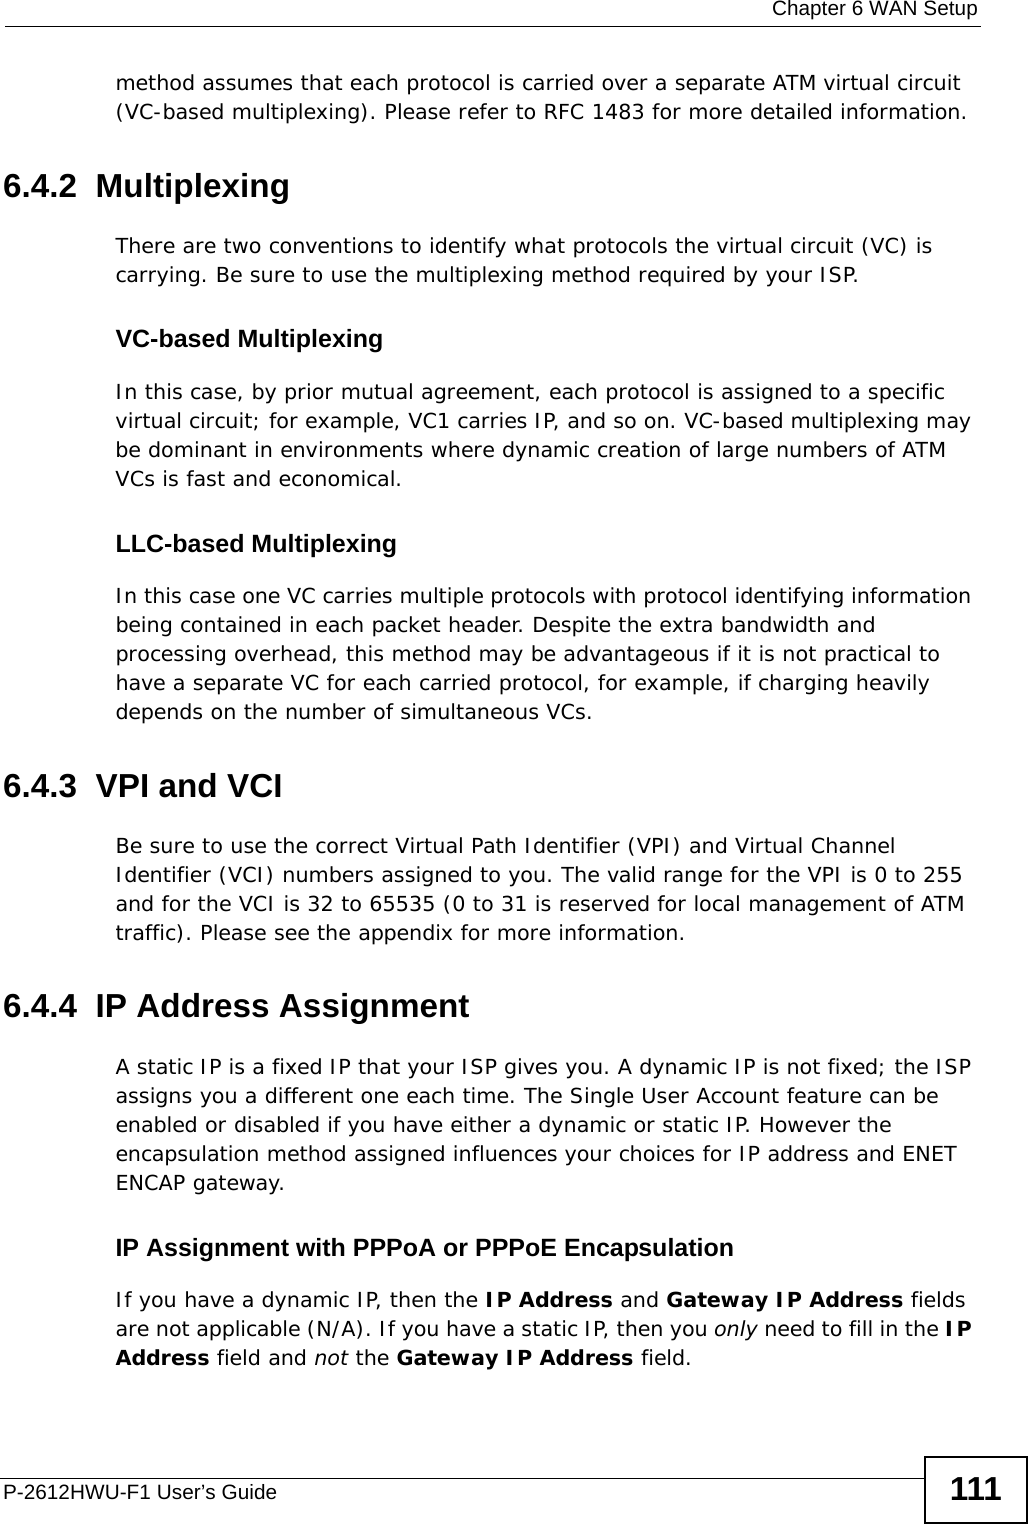  Chapter 6 WAN SetupP-2612HWU-F1 User’s Guide 111method assumes that each protocol is carried over a separate ATM virtual circuit (VC-based multiplexing). Please refer to RFC 1483 for more detailed information.6.4.2  MultiplexingThere are two conventions to identify what protocols the virtual circuit (VC) is carrying. Be sure to use the multiplexing method required by your ISP.VC-based MultiplexingIn this case, by prior mutual agreement, each protocol is assigned to a specific virtual circuit; for example, VC1 carries IP, and so on. VC-based multiplexing may be dominant in environments where dynamic creation of large numbers of ATM VCs is fast and economical.LLC-based MultiplexingIn this case one VC carries multiple protocols with protocol identifying information being contained in each packet header. Despite the extra bandwidth and processing overhead, this method may be advantageous if it is not practical to have a separate VC for each carried protocol, for example, if charging heavily depends on the number of simultaneous VCs.6.4.3  VPI and VCIBe sure to use the correct Virtual Path Identifier (VPI) and Virtual Channel Identifier (VCI) numbers assigned to you. The valid range for the VPI is 0 to 255 and for the VCI is 32 to 65535 (0 to 31 is reserved for local management of ATM traffic). Please see the appendix for more information.6.4.4  IP Address AssignmentA static IP is a fixed IP that your ISP gives you. A dynamic IP is not fixed; the ISP assigns you a different one each time. The Single User Account feature can be enabled or disabled if you have either a dynamic or static IP. However the encapsulation method assigned influences your choices for IP address and ENET ENCAP gateway.IP Assignment with PPPoA or PPPoE EncapsulationIf you have a dynamic IP, then the IP Address and Gateway IP Address fields are not applicable (N/A). If you have a static IP, then you only need to fill in the IP Address field and not the Gateway IP Address field.